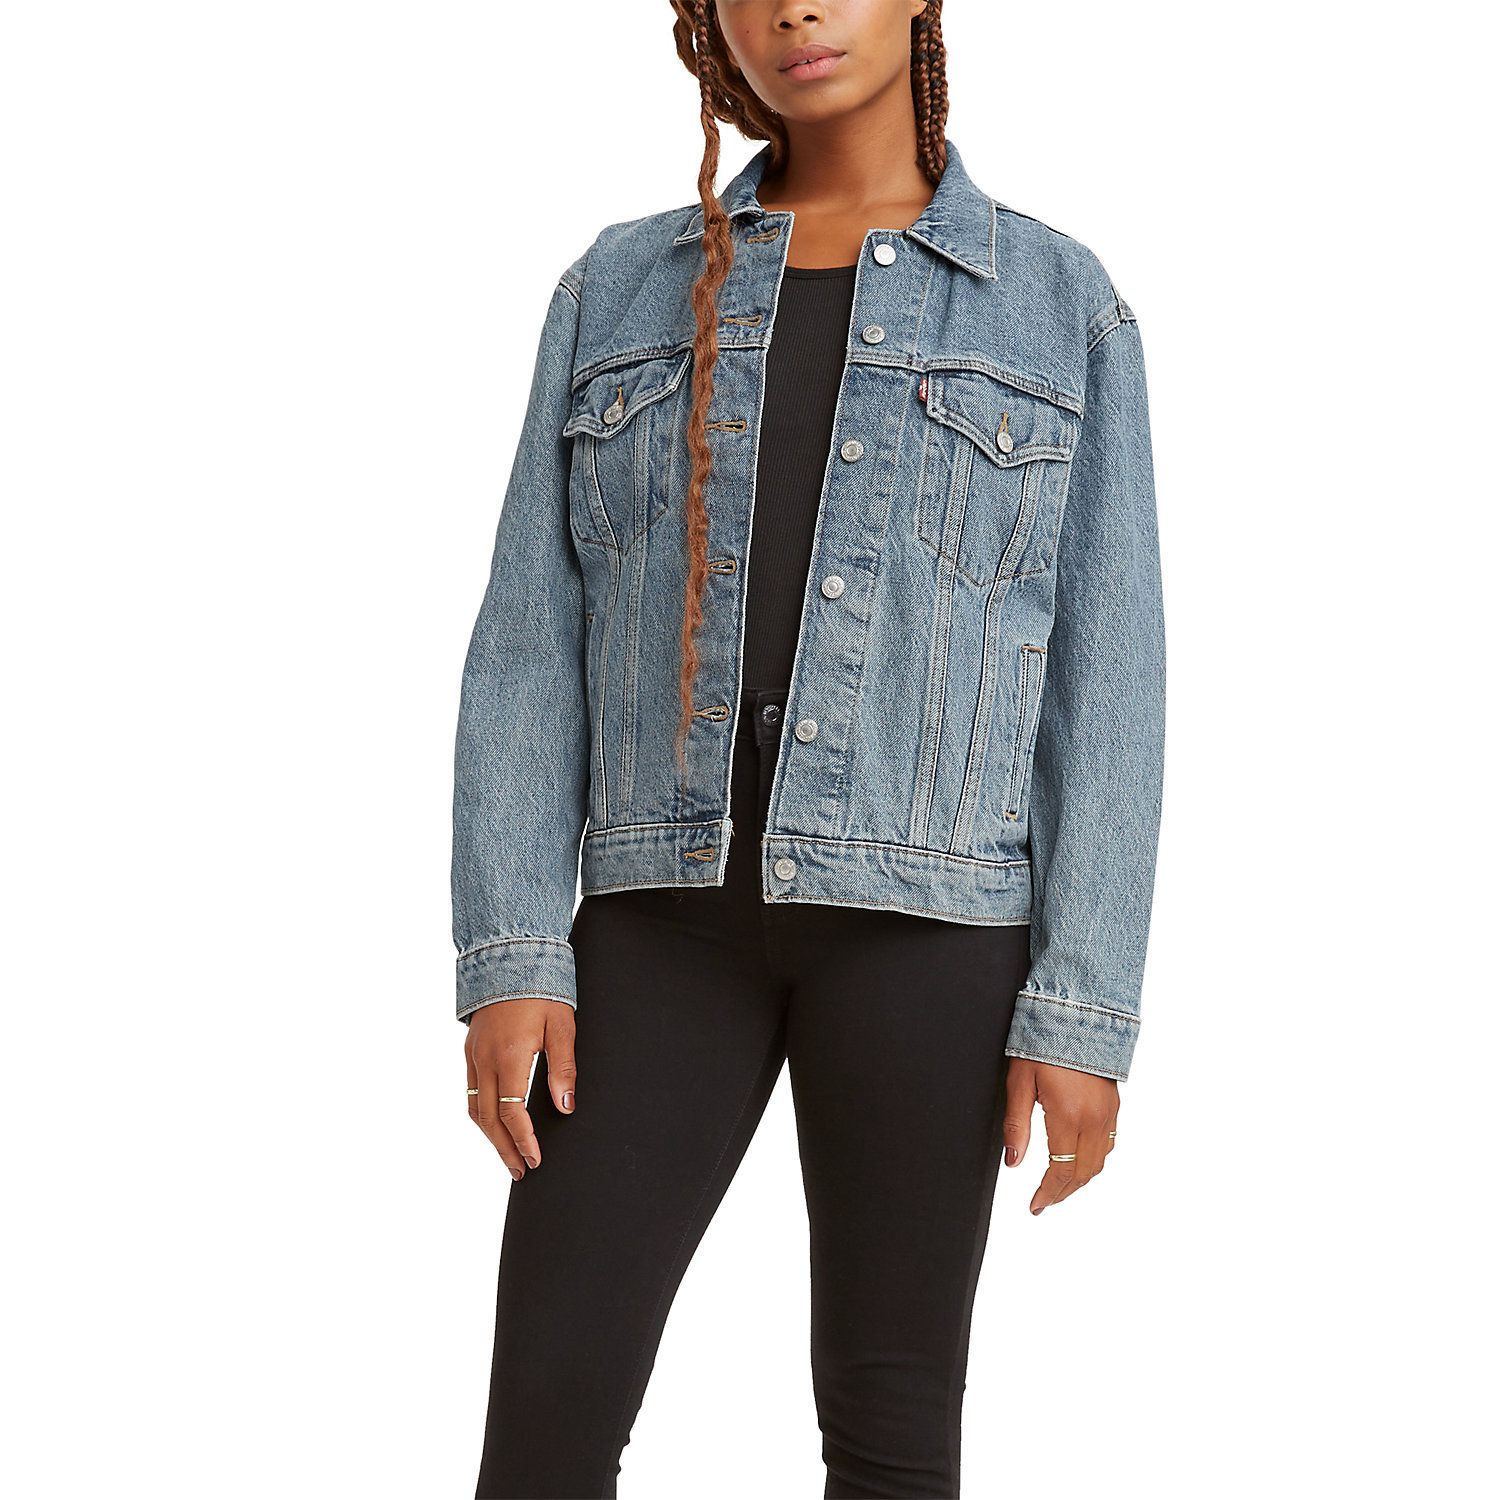 jean jackets for womens at kohls